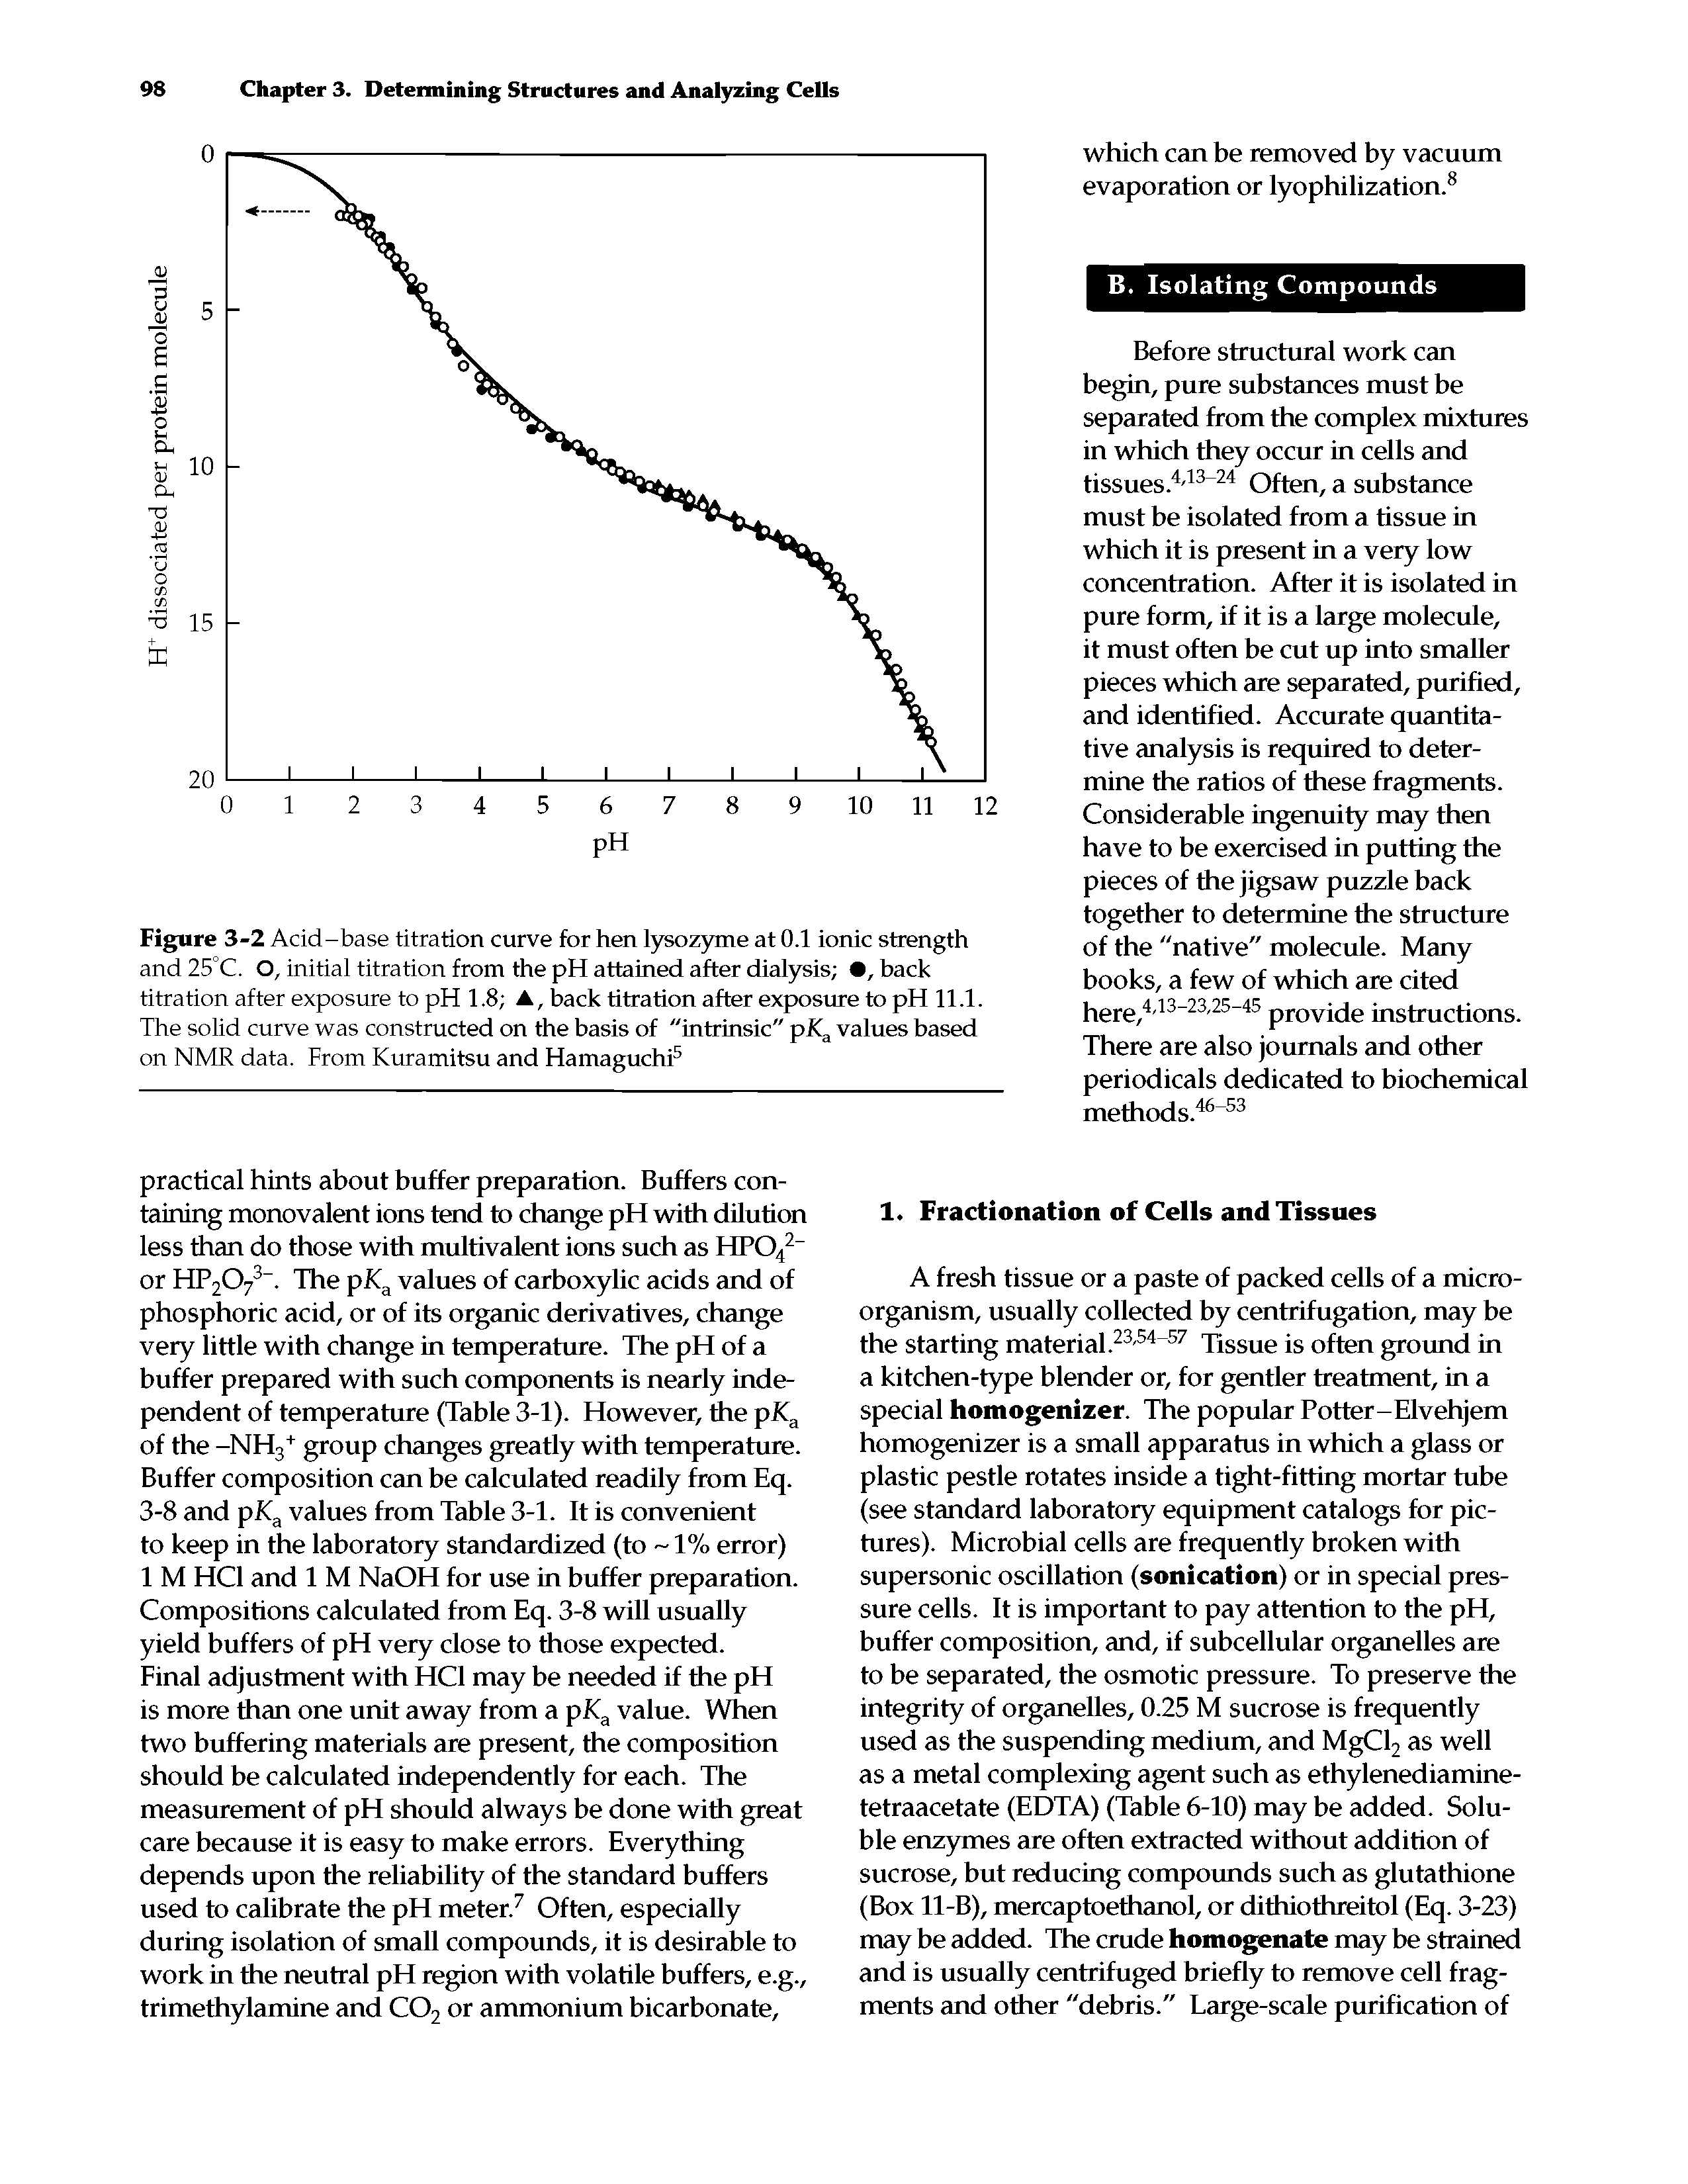 Figure 3-2 Acid-base titration curve for hen lysozyme at 0.1 ionic strength and 25°C. O, initial titration from the pH attained after dialysis , back titration after exposure to pH 1.8 A, back titration after exposure to pH 11.1. The solid curve was constructed on the basis of "intrinsic" pK values based on NMR data. From Kuramitsu and Hamaguchi ...